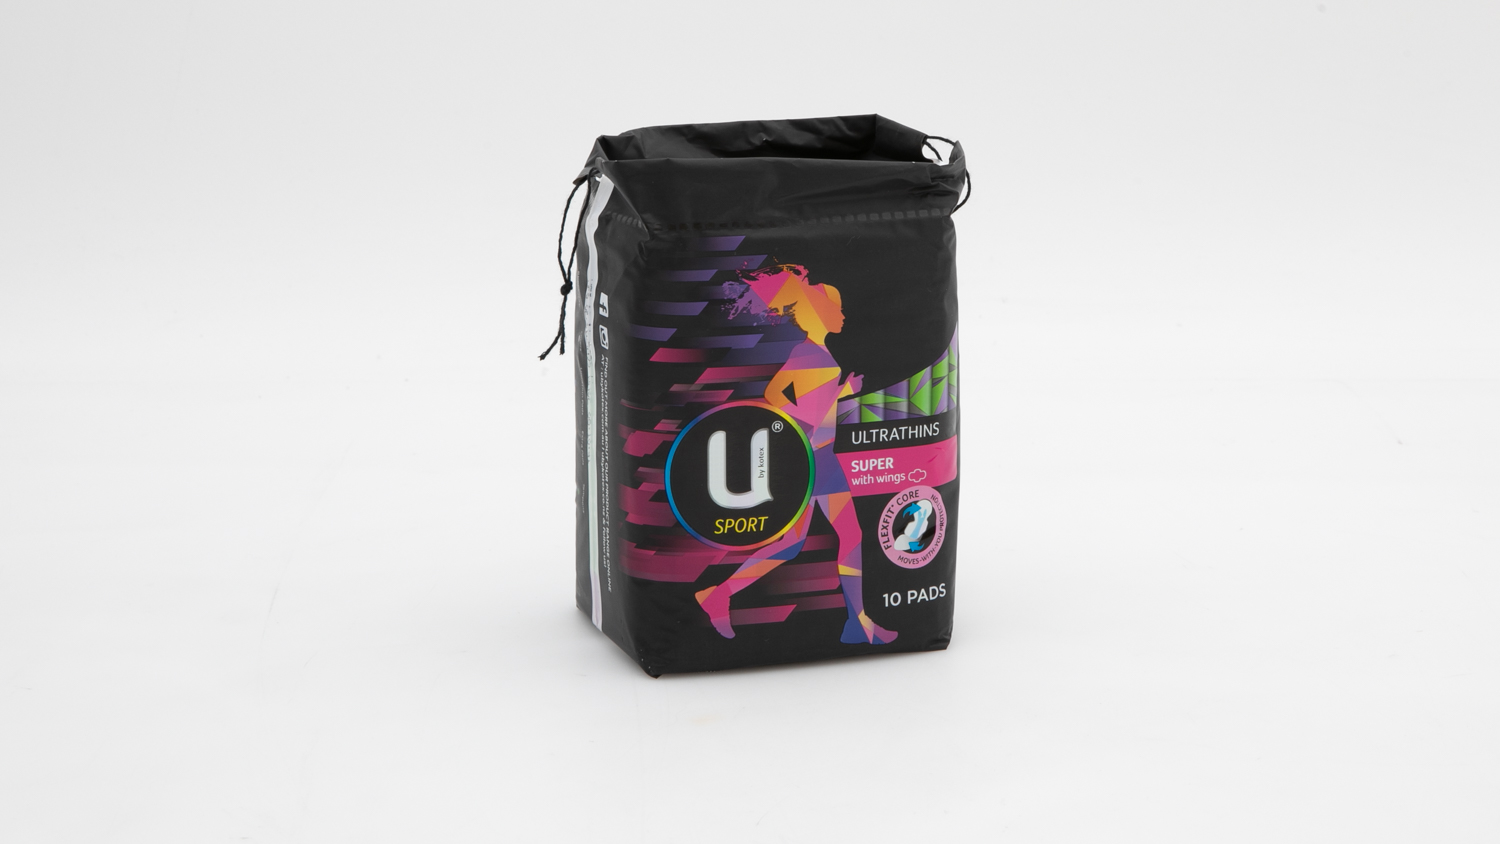 U by Kotex Sport Ultrathins Super with wings carousel image